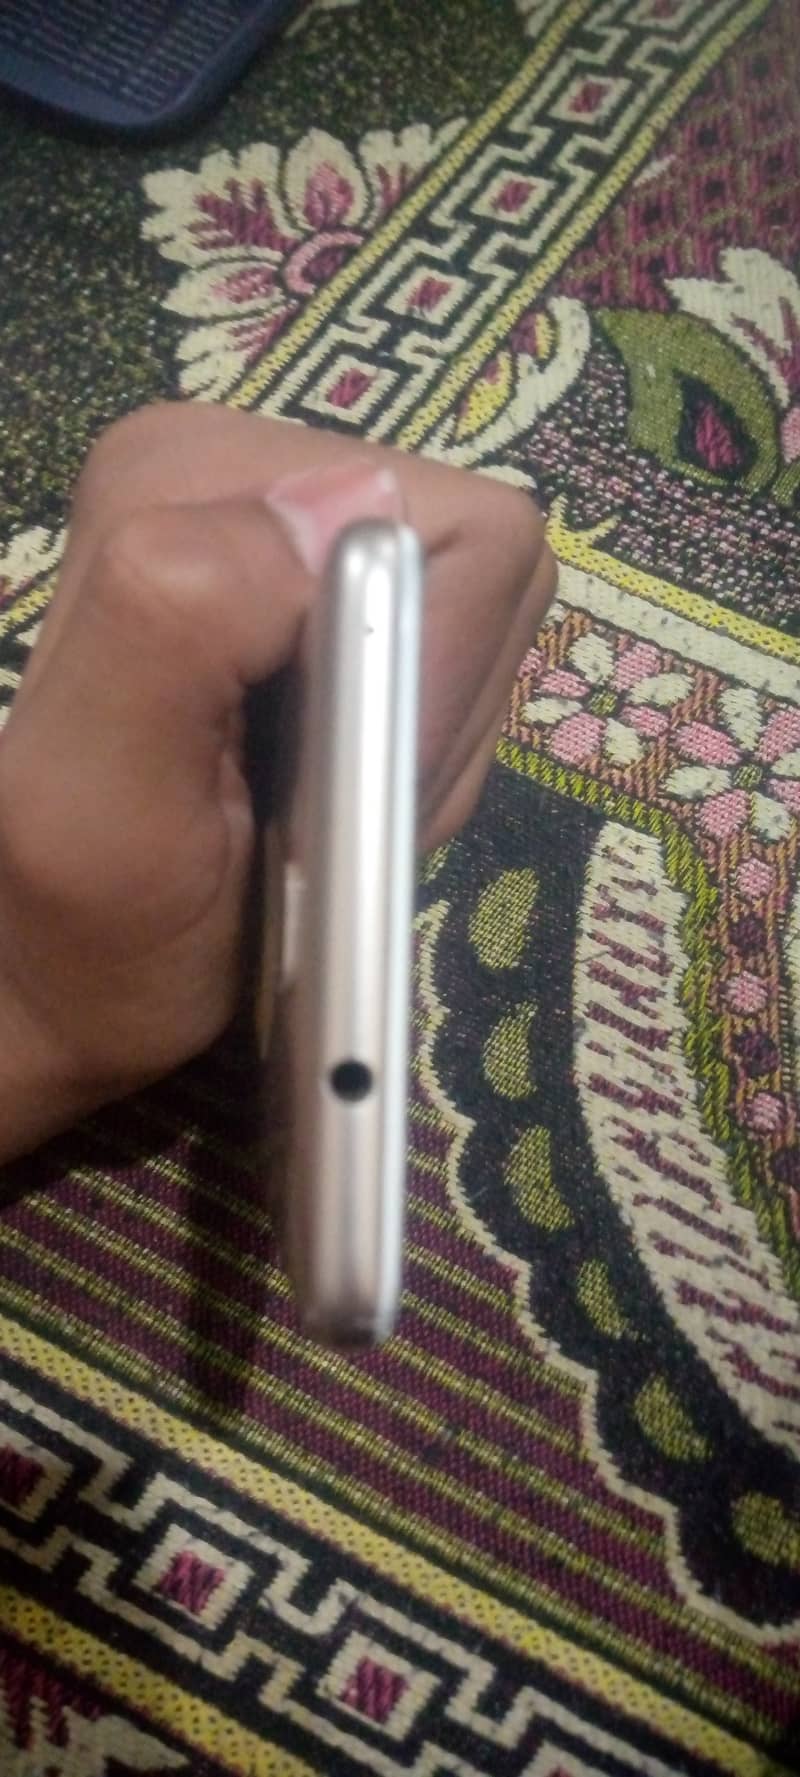 Honor 5C For Sale 4